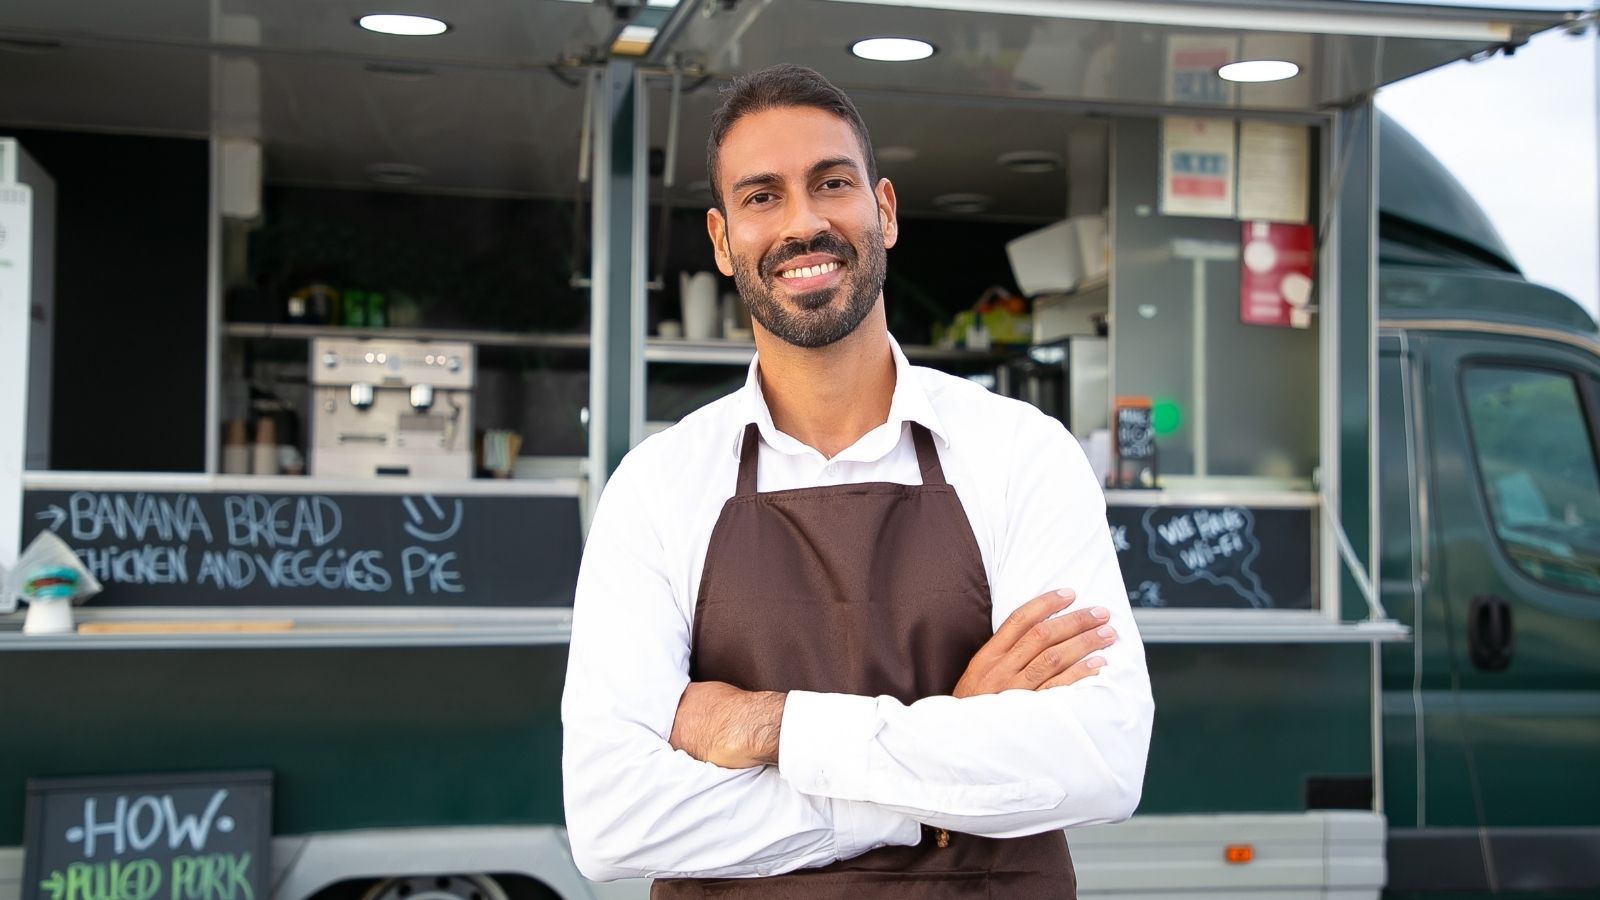 Online Ordering for Food Trucks: How It Helps